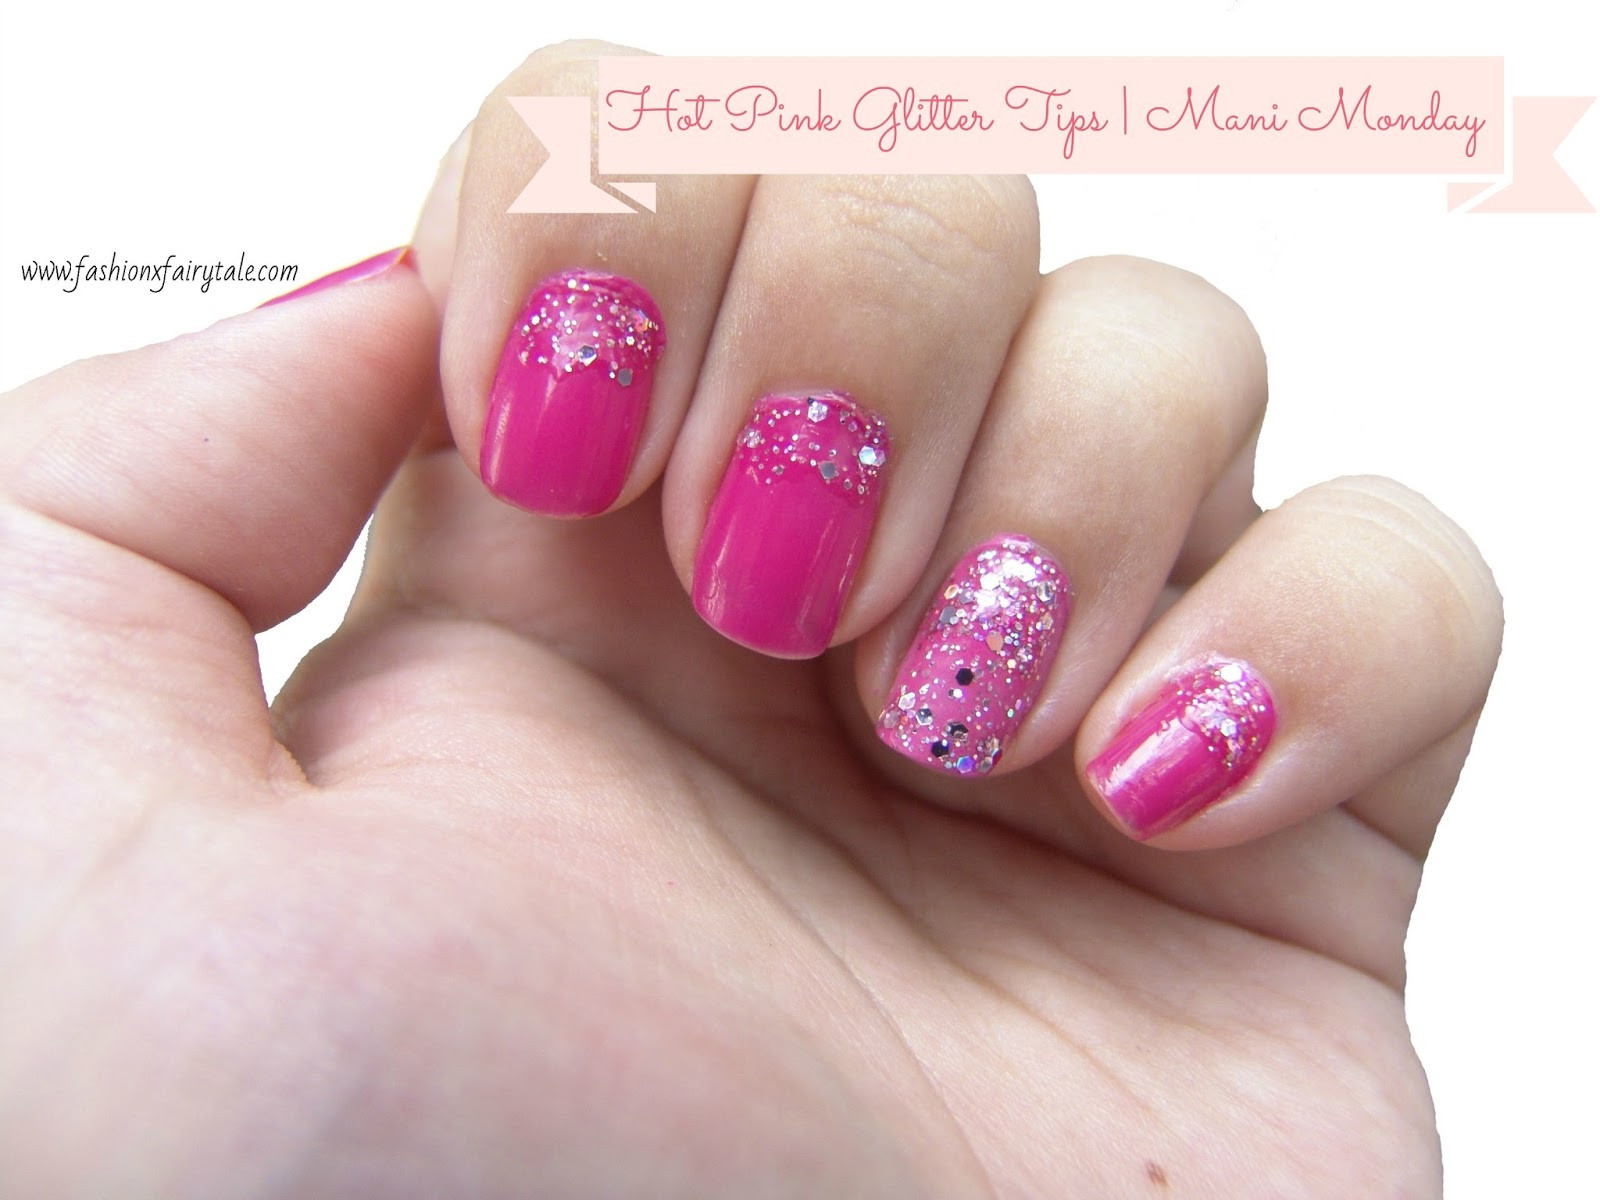 Pink Nails With Glitter Tips
 Hot Pink Glitter Tips